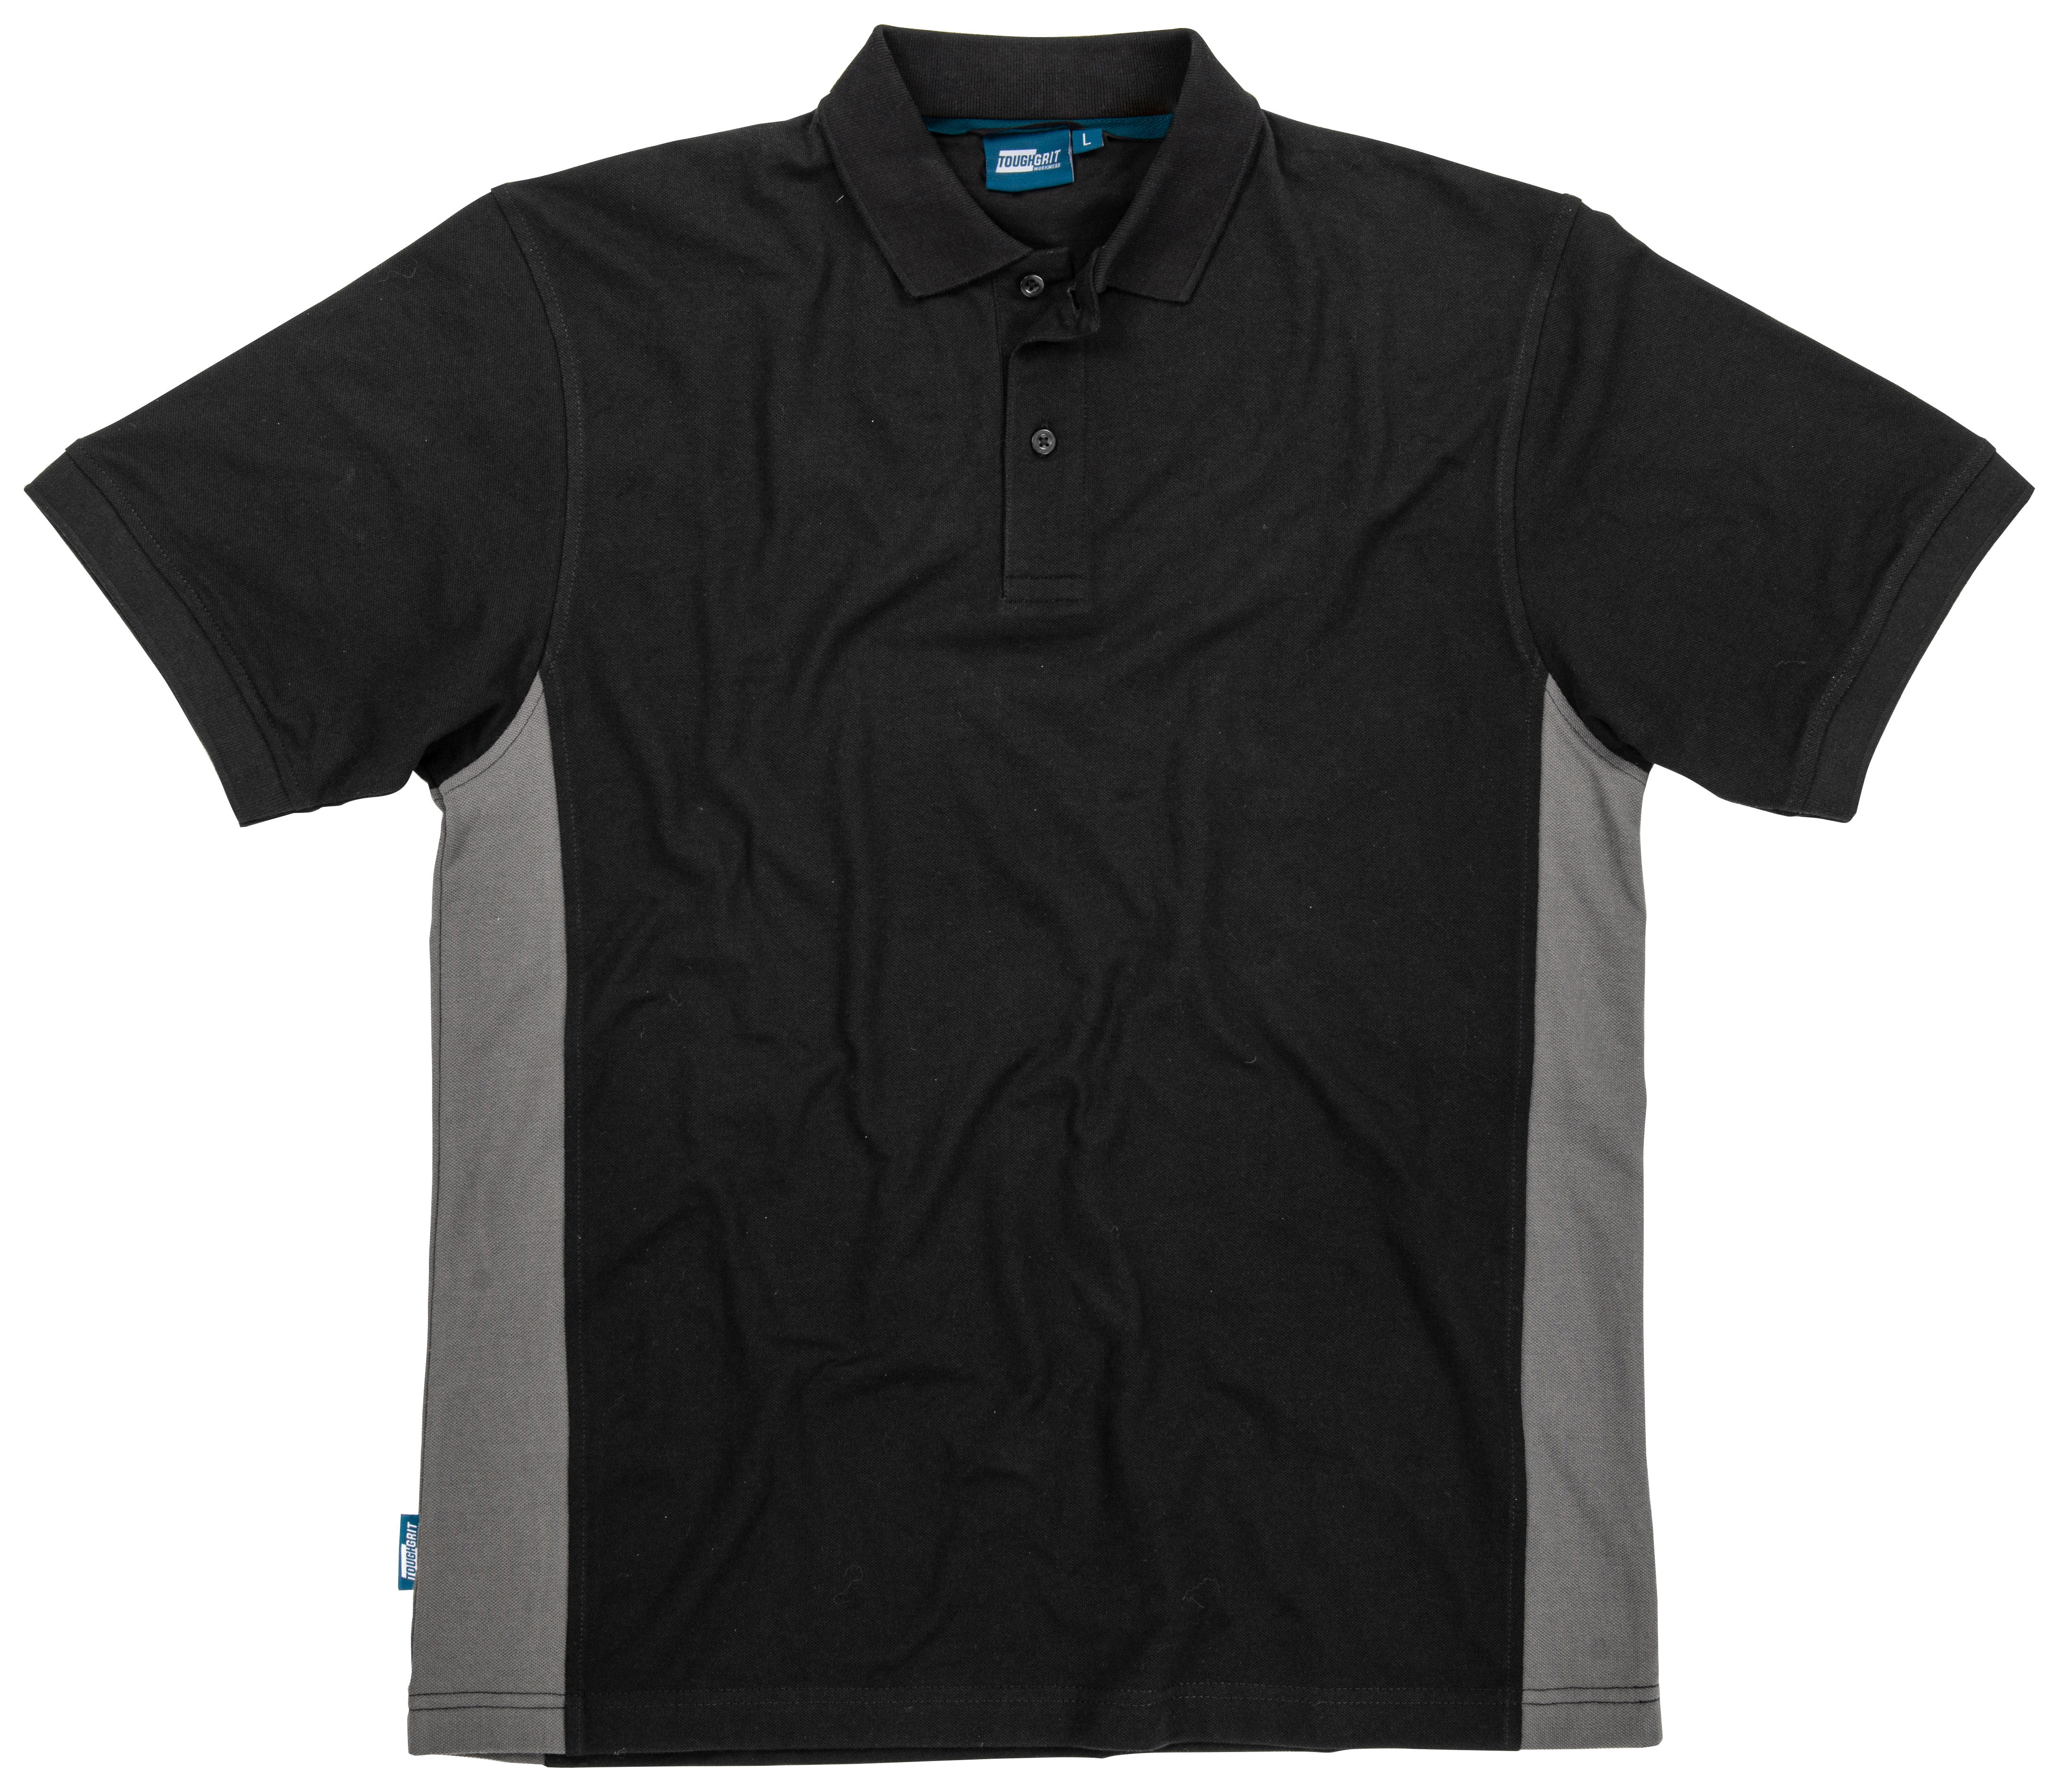 Image of Tough Grit Polo Shirt, in Black and Grey Breathable, Cotton, Size: XL